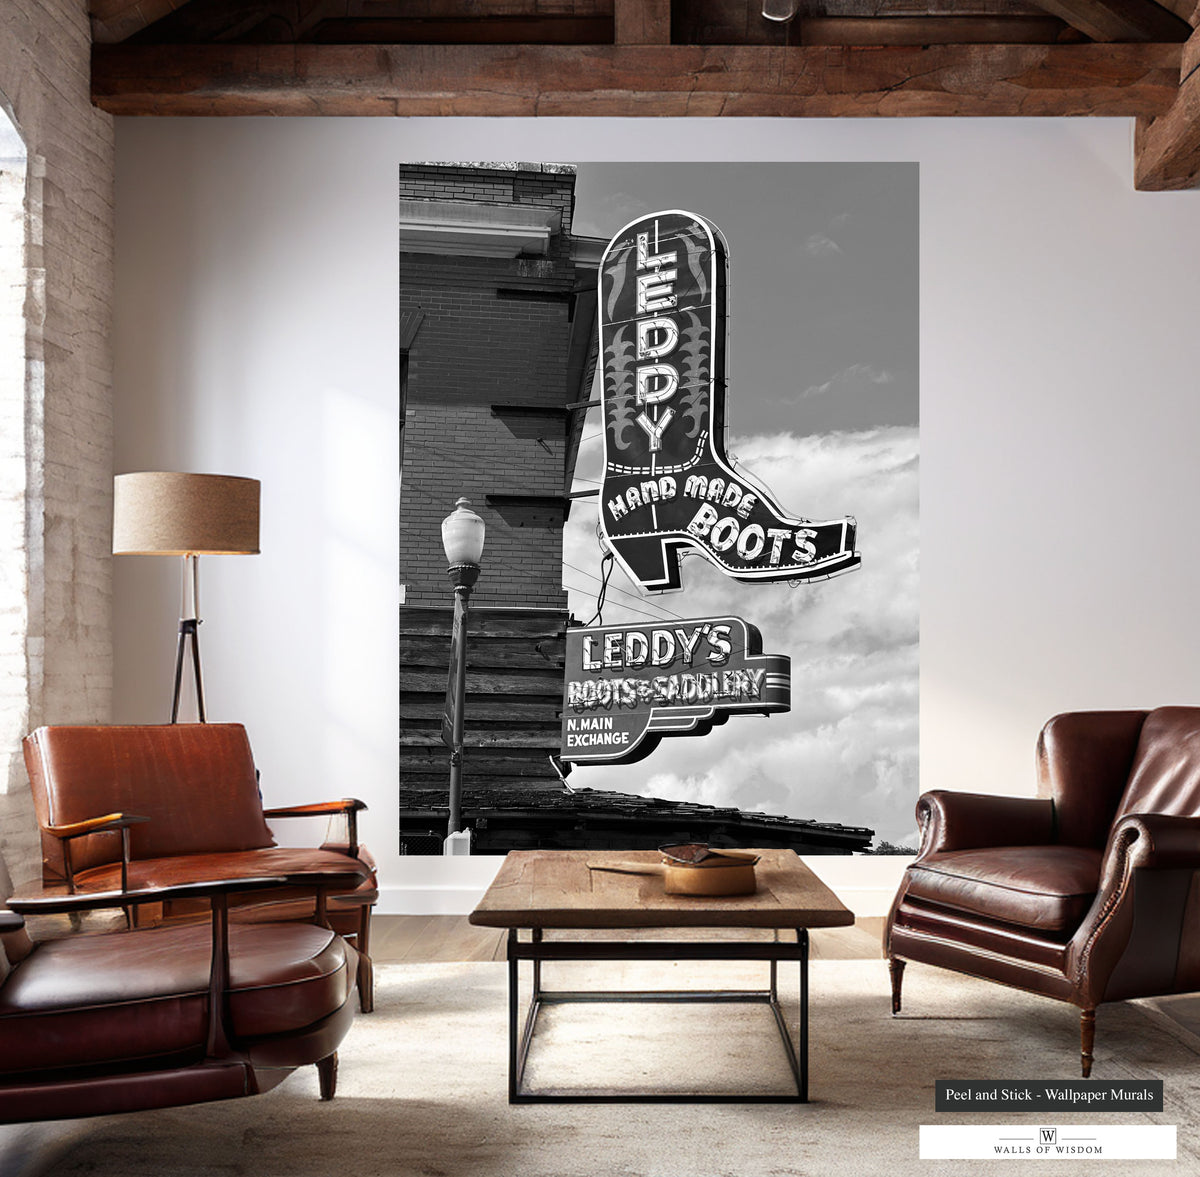 Rustic farmhouse decor with a large photo mural of Leddy's Boot.